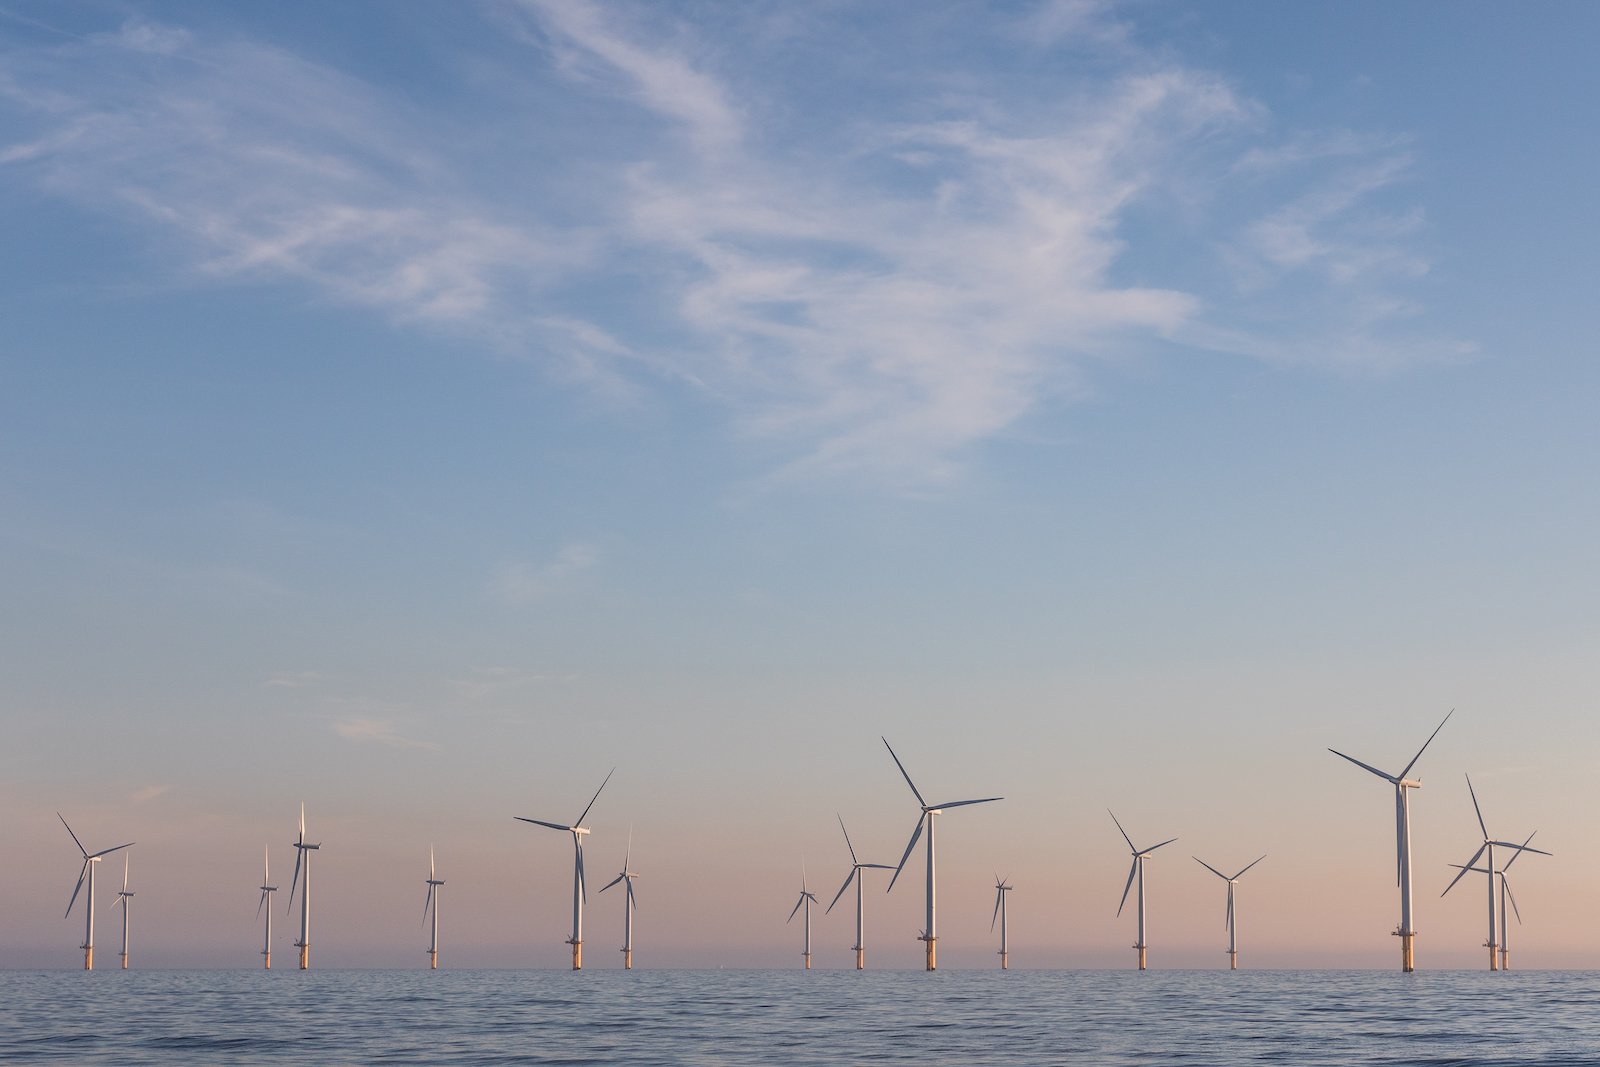 Better late than never: Biden administration unveils new push for offshore wind